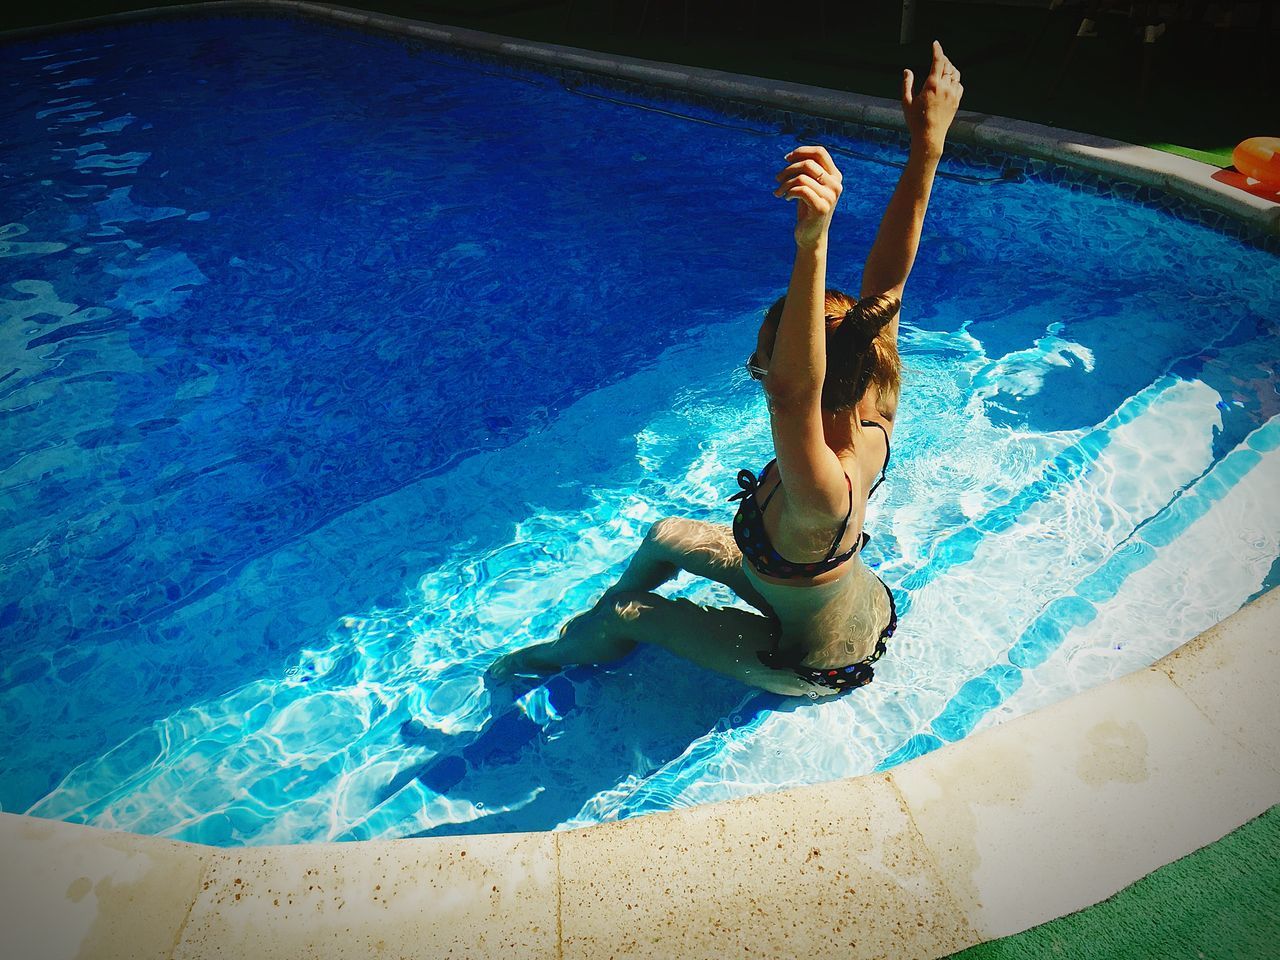 YOUNG WOMAN SWIMMING IN POOL WITH WATER